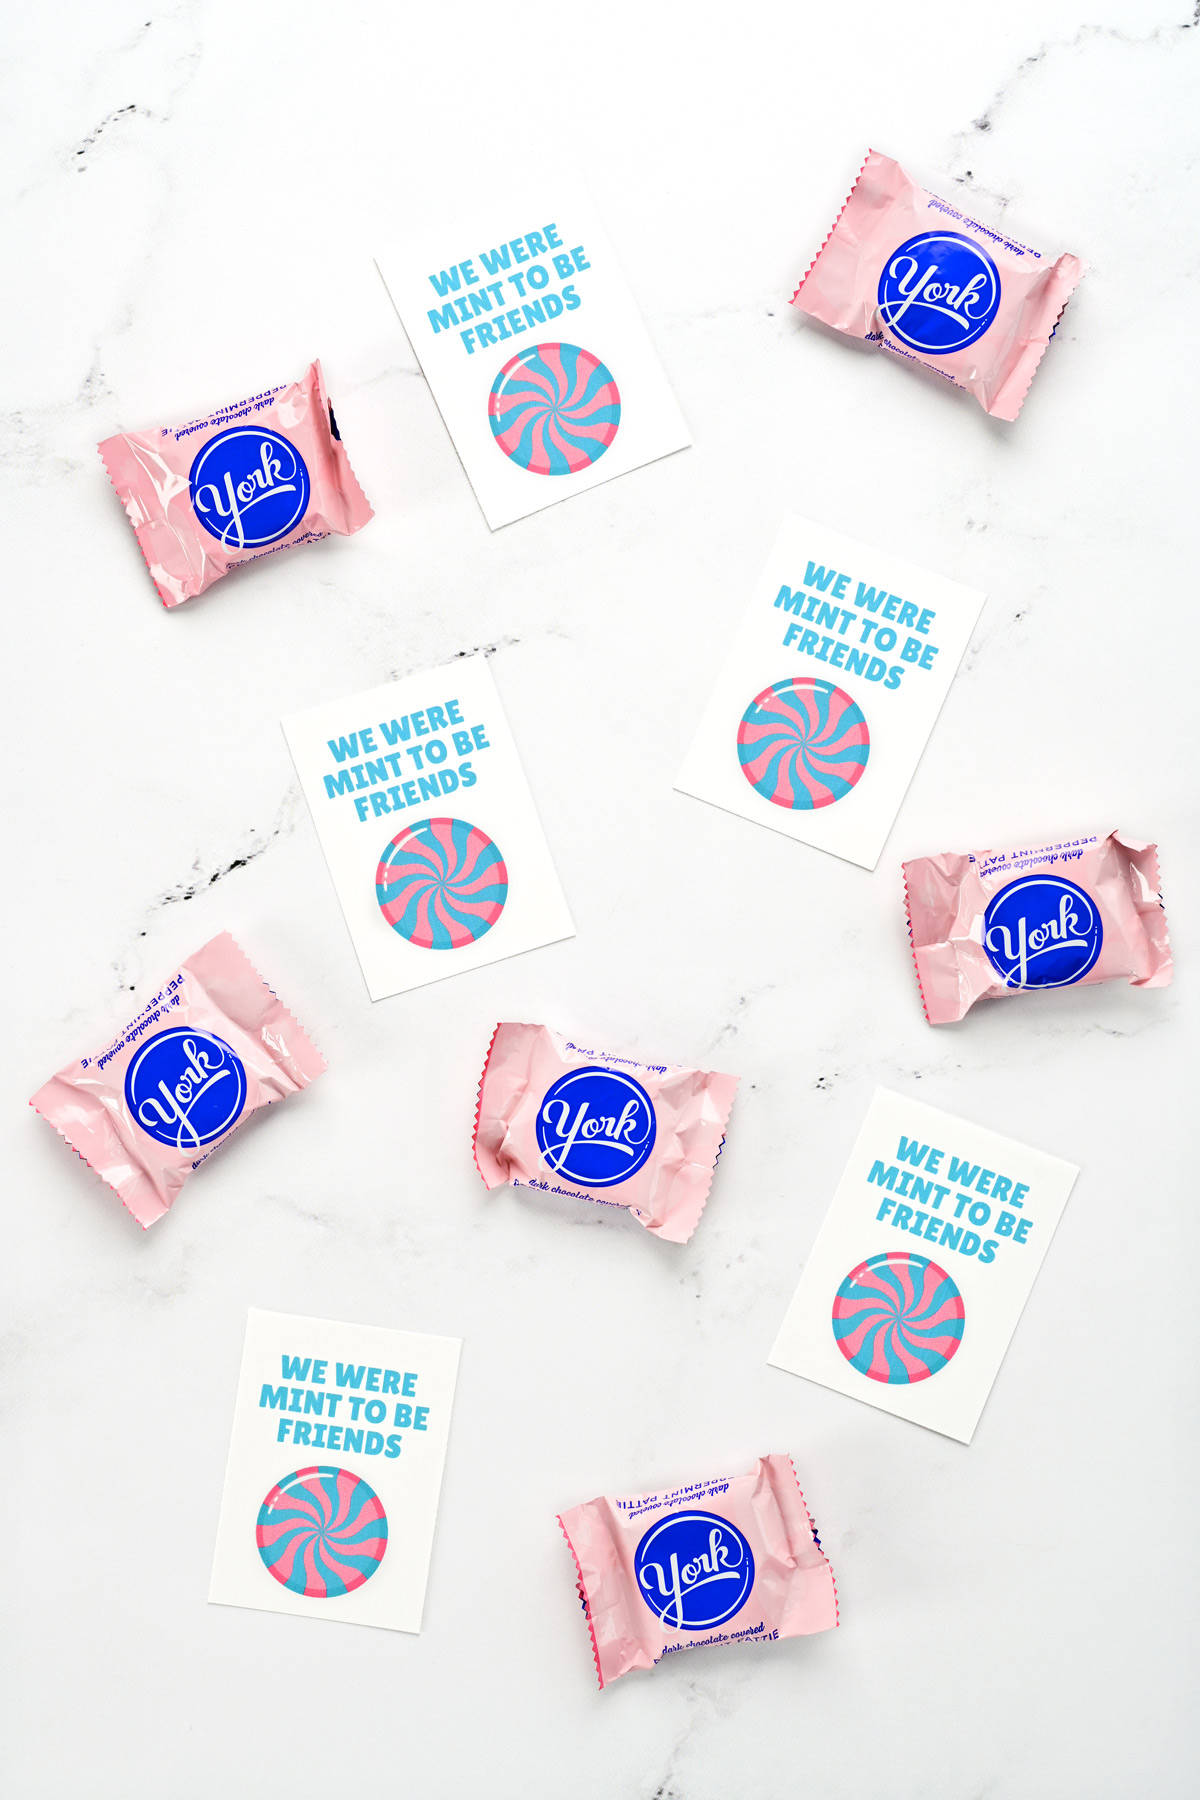 York peppermint patties and printable valentine cards on a countertop.